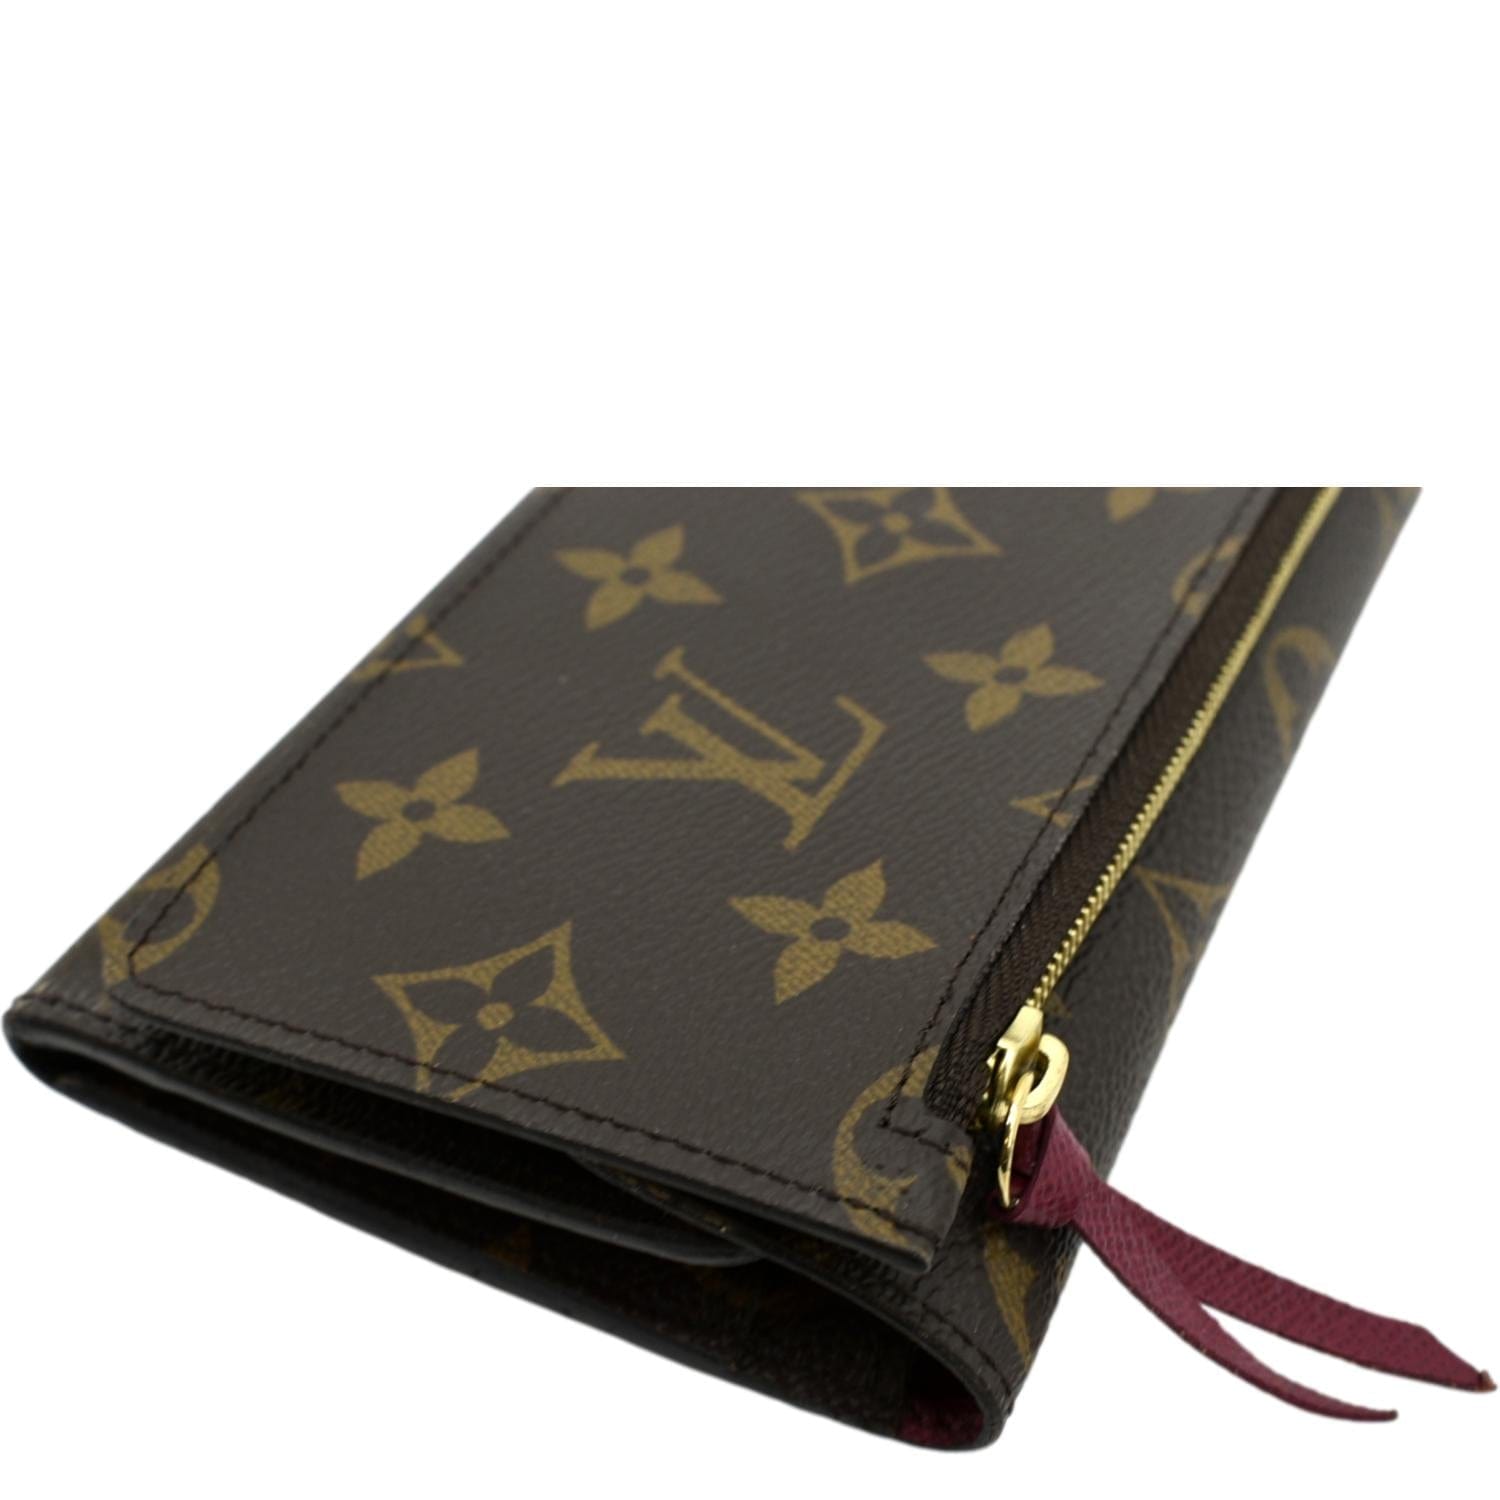 REVEAL* New Accessory from Louis Vuitton! Josephine Wallet 